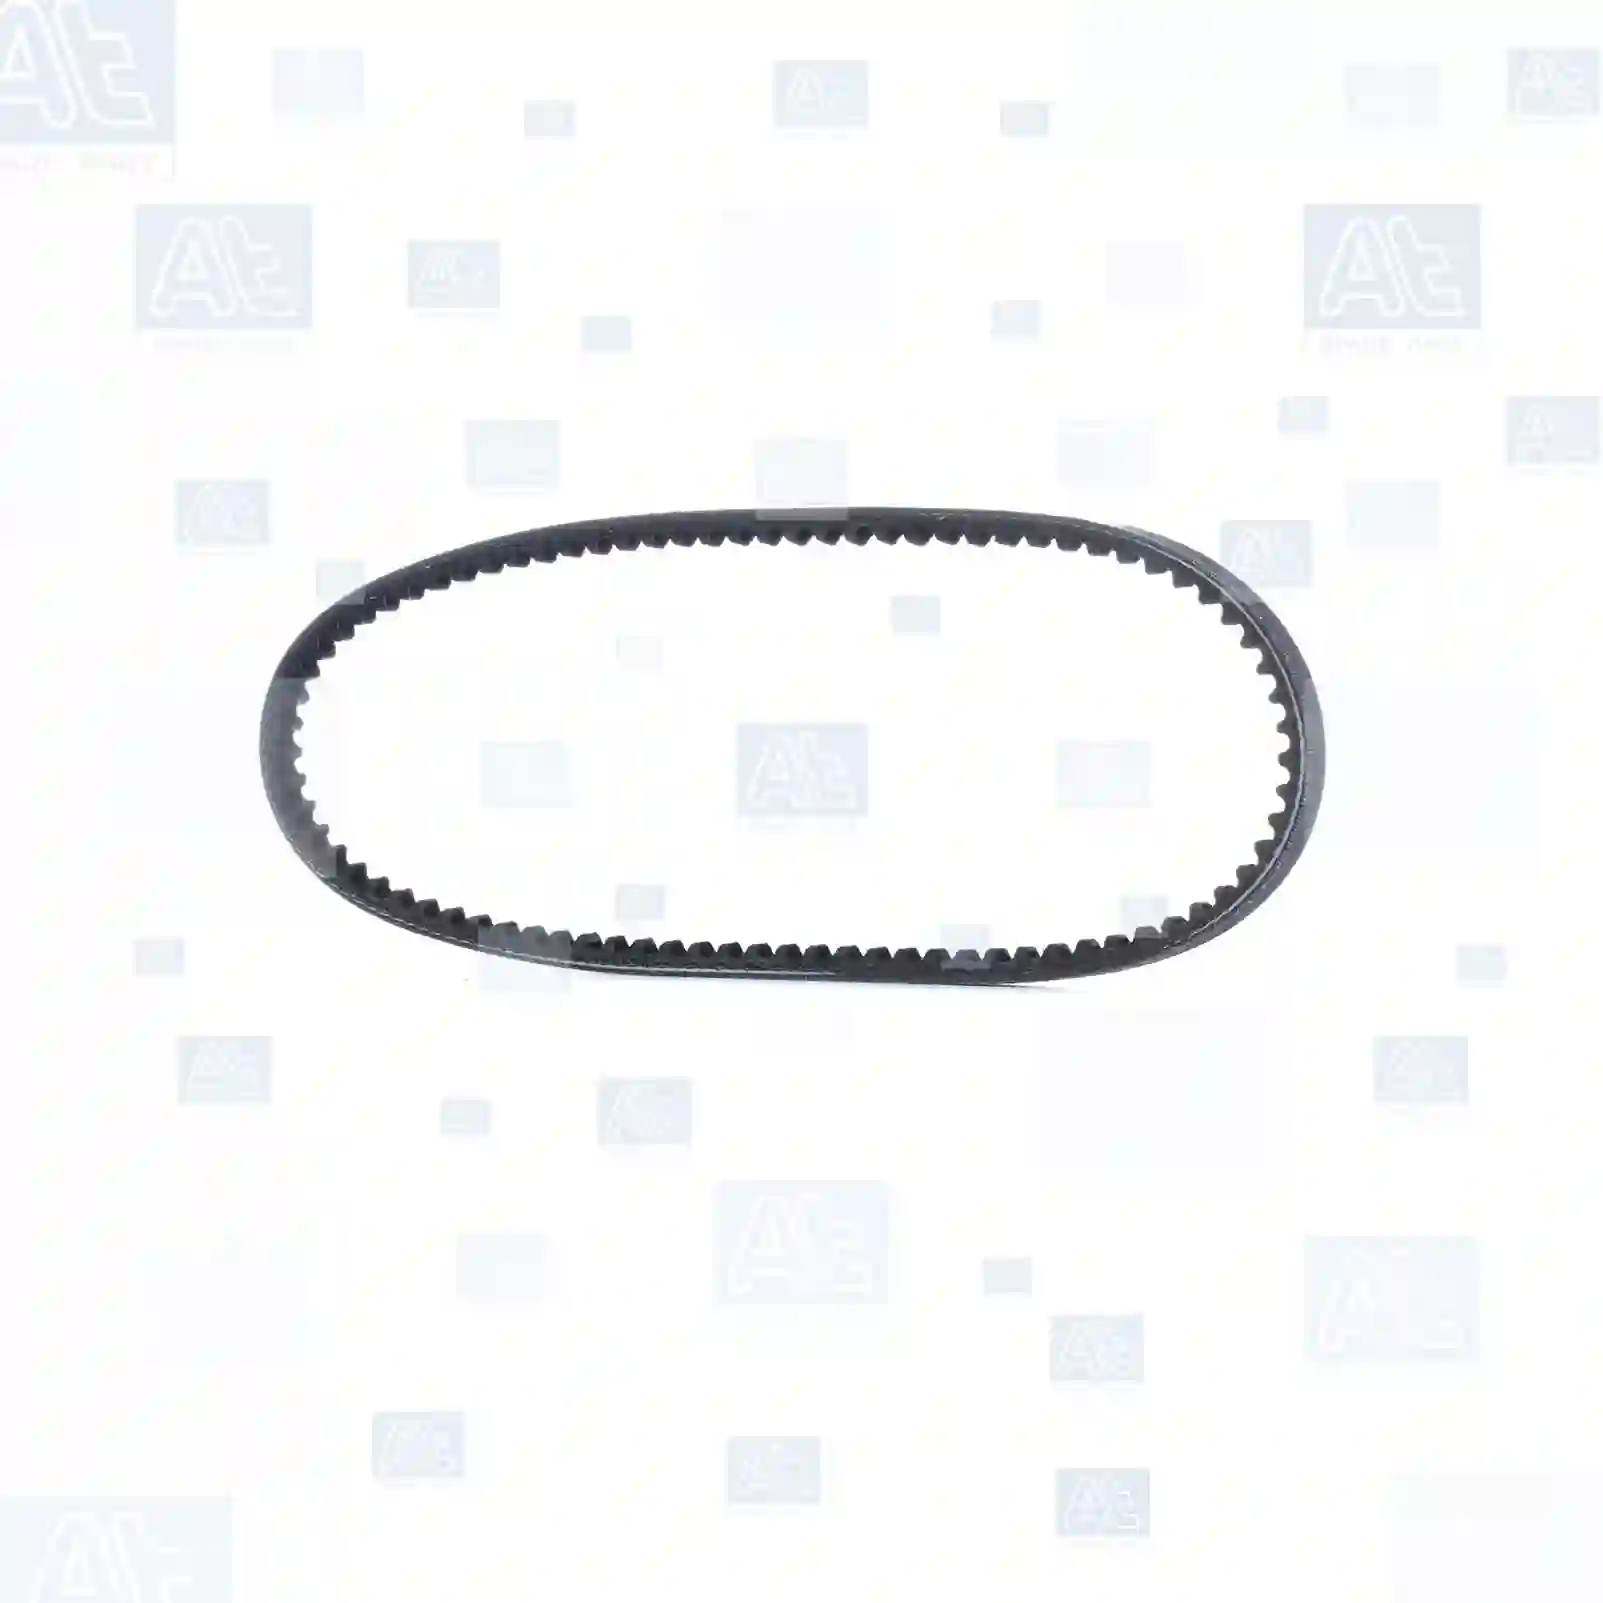 V-belt, 77707616, 7700321502, 613602, GFB211, 2696274, 2696275, 8835275, 8839164, 9966579, 9966580, 5000033113, 5000048794, 5000049301, GFB202, B0015491, 575015, 7700521502, 0106920, 106920, 611023, ST01225, 2128751, 2863564, 5012331, 91074366, 9966580, 3132523R1, 04749911, 4749911, 82336411, 613602, 613602, GFB211, 613602, GFB211, 386061, 575015, 2128751, 539130, 2724E8A602B, 5000041122, 5000044031, 5000048793, 5000048794, 5000049301, 5000133113, 5000297763, 5000686360, 7700006809, 7700525076, 7700549230, 7700664248, 7700670935, 7701029709, 611023, 613602, GFB202, GFB211, 5000041122, 5000044031, 5000048793, 5000048794, 5000049301, 5000133113, 613602, GFB211, 958315 ||  77707616 At Spare Part | Engine, Accelerator Pedal, Camshaft, Connecting Rod, Crankcase, Crankshaft, Cylinder Head, Engine Suspension Mountings, Exhaust Manifold, Exhaust Gas Recirculation, Filter Kits, Flywheel Housing, General Overhaul Kits, Engine, Intake Manifold, Oil Cleaner, Oil Cooler, Oil Filter, Oil Pump, Oil Sump, Piston & Liner, Sensor & Switch, Timing Case, Turbocharger, Cooling System, Belt Tensioner, Coolant Filter, Coolant Pipe, Corrosion Prevention Agent, Drive, Expansion Tank, Fan, Intercooler, Monitors & Gauges, Radiator, Thermostat, V-Belt / Timing belt, Water Pump, Fuel System, Electronical Injector Unit, Feed Pump, Fuel Filter, cpl., Fuel Gauge Sender,  Fuel Line, Fuel Pump, Fuel Tank, Injection Line Kit, Injection Pump, Exhaust System, Clutch & Pedal, Gearbox, Propeller Shaft, Axles, Brake System, Hubs & Wheels, Suspension, Leaf Spring, Universal Parts / Accessories, Steering, Electrical System, Cabin V-belt, 77707616, 7700321502, 613602, GFB211, 2696274, 2696275, 8835275, 8839164, 9966579, 9966580, 5000033113, 5000048794, 5000049301, GFB202, B0015491, 575015, 7700521502, 0106920, 106920, 611023, ST01225, 2128751, 2863564, 5012331, 91074366, 9966580, 3132523R1, 04749911, 4749911, 82336411, 613602, 613602, GFB211, 613602, GFB211, 386061, 575015, 2128751, 539130, 2724E8A602B, 5000041122, 5000044031, 5000048793, 5000048794, 5000049301, 5000133113, 5000297763, 5000686360, 7700006809, 7700525076, 7700549230, 7700664248, 7700670935, 7701029709, 611023, 613602, GFB202, GFB211, 5000041122, 5000044031, 5000048793, 5000048794, 5000049301, 5000133113, 613602, GFB211, 958315 ||  77707616 At Spare Part | Engine, Accelerator Pedal, Camshaft, Connecting Rod, Crankcase, Crankshaft, Cylinder Head, Engine Suspension Mountings, Exhaust Manifold, Exhaust Gas Recirculation, Filter Kits, Flywheel Housing, General Overhaul Kits, Engine, Intake Manifold, Oil Cleaner, Oil Cooler, Oil Filter, Oil Pump, Oil Sump, Piston & Liner, Sensor & Switch, Timing Case, Turbocharger, Cooling System, Belt Tensioner, Coolant Filter, Coolant Pipe, Corrosion Prevention Agent, Drive, Expansion Tank, Fan, Intercooler, Monitors & Gauges, Radiator, Thermostat, V-Belt / Timing belt, Water Pump, Fuel System, Electronical Injector Unit, Feed Pump, Fuel Filter, cpl., Fuel Gauge Sender,  Fuel Line, Fuel Pump, Fuel Tank, Injection Line Kit, Injection Pump, Exhaust System, Clutch & Pedal, Gearbox, Propeller Shaft, Axles, Brake System, Hubs & Wheels, Suspension, Leaf Spring, Universal Parts / Accessories, Steering, Electrical System, Cabin